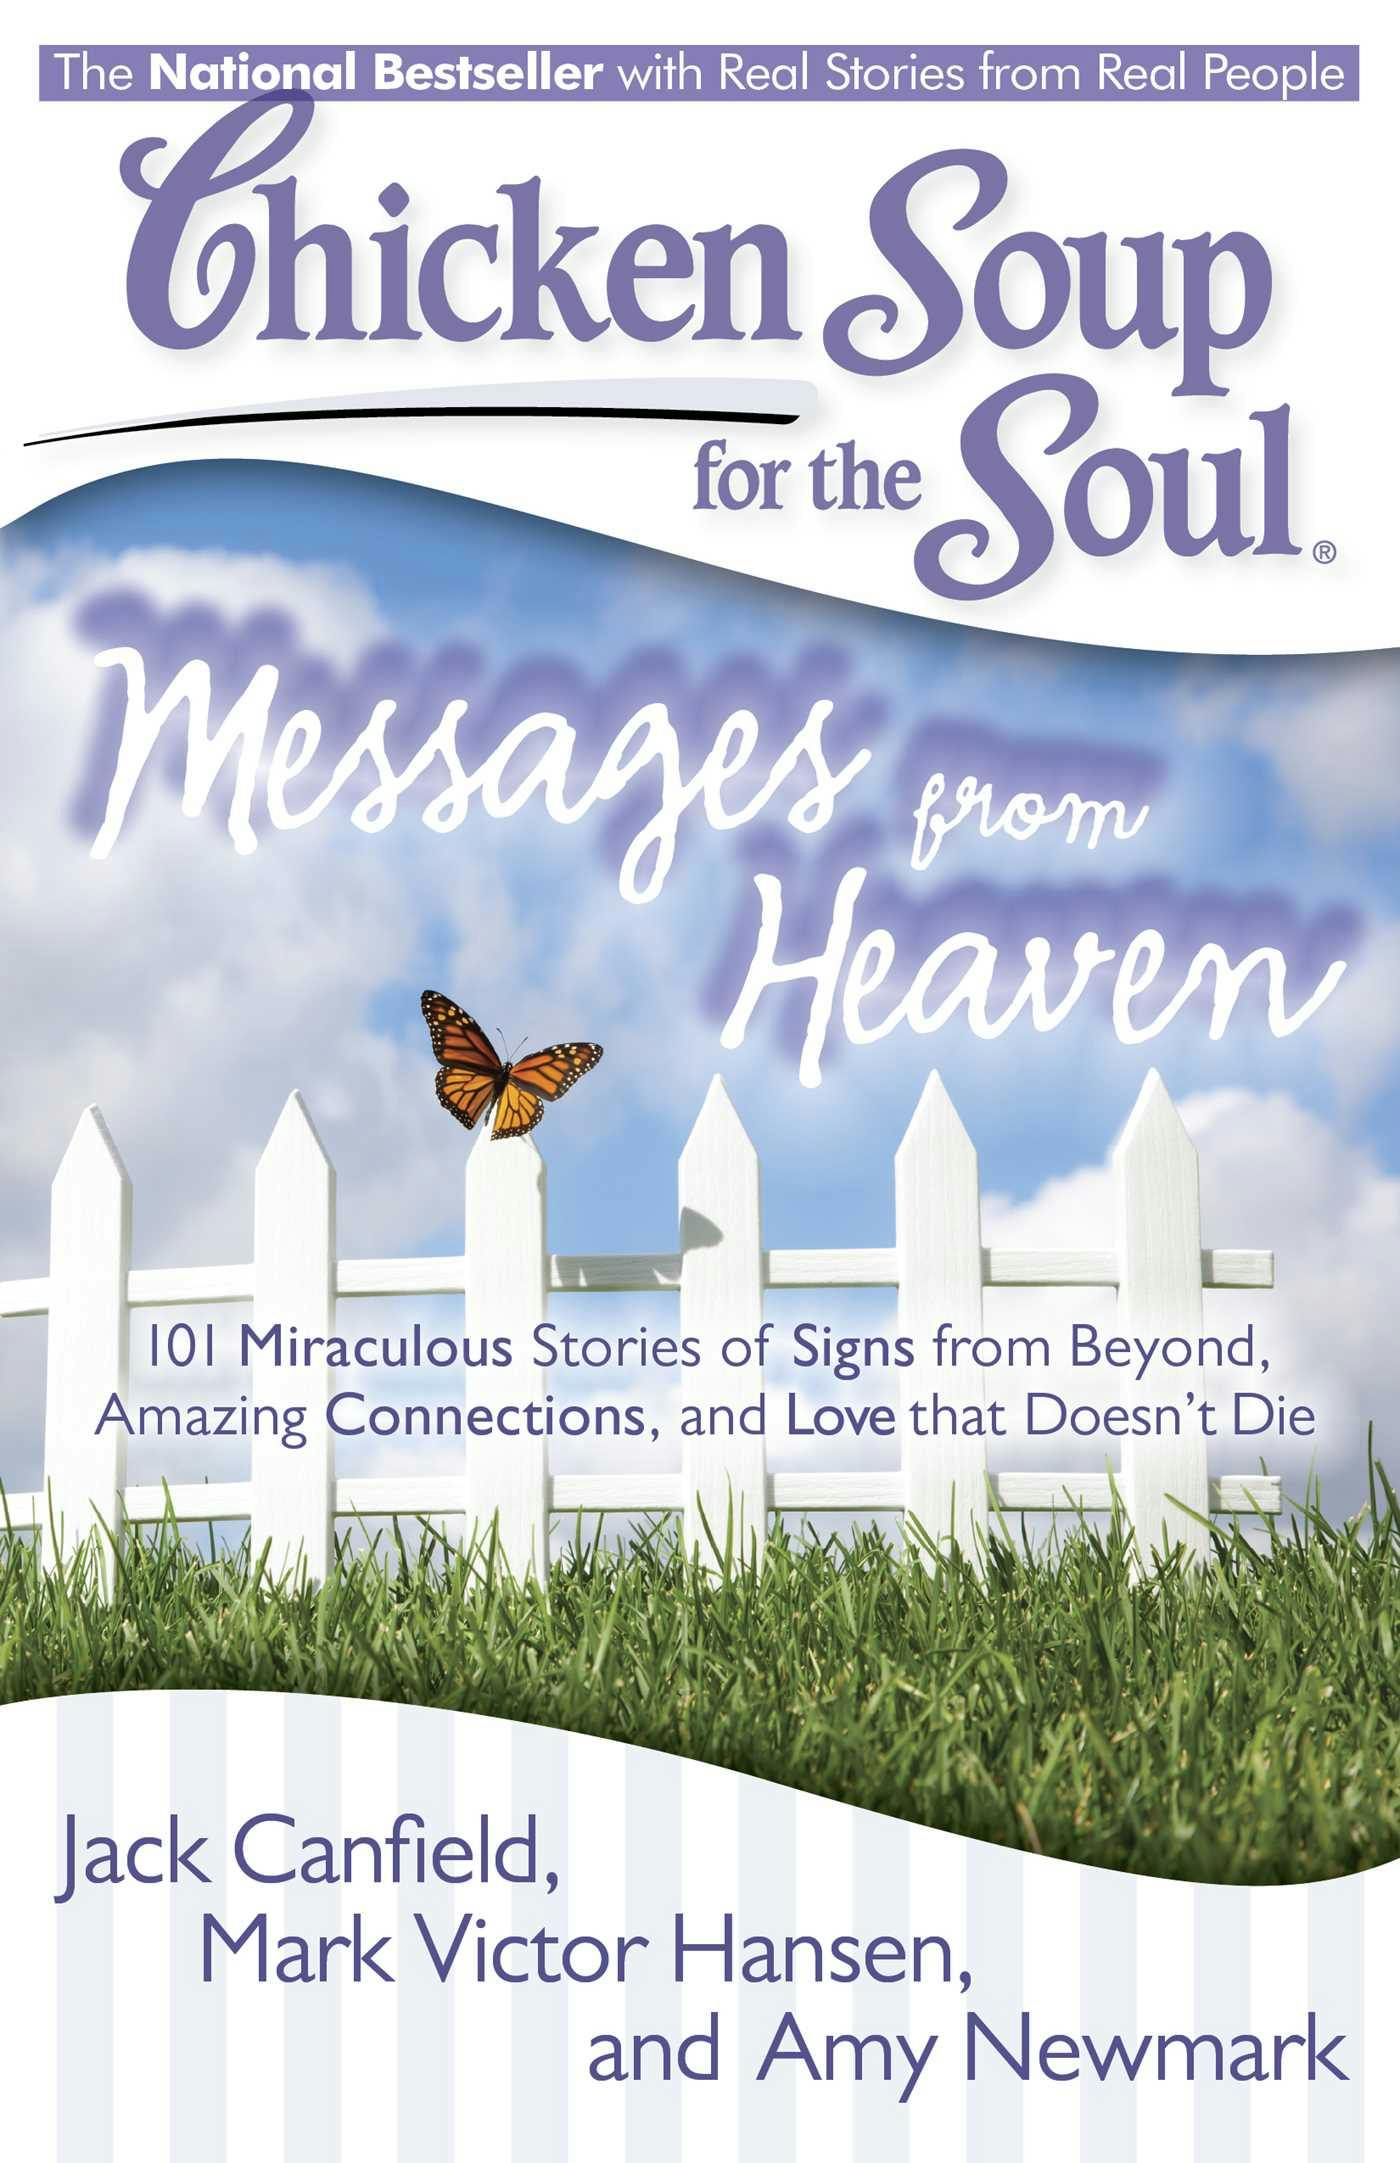 Chicken Soup for the Soul: Messages from Heaven: 101 Miraculous Stories of Signs from Beyond, Amazing Connections, and Love that Doesn't Die - Mark Victor Hansen, Jack Canfield, Amy Newmark